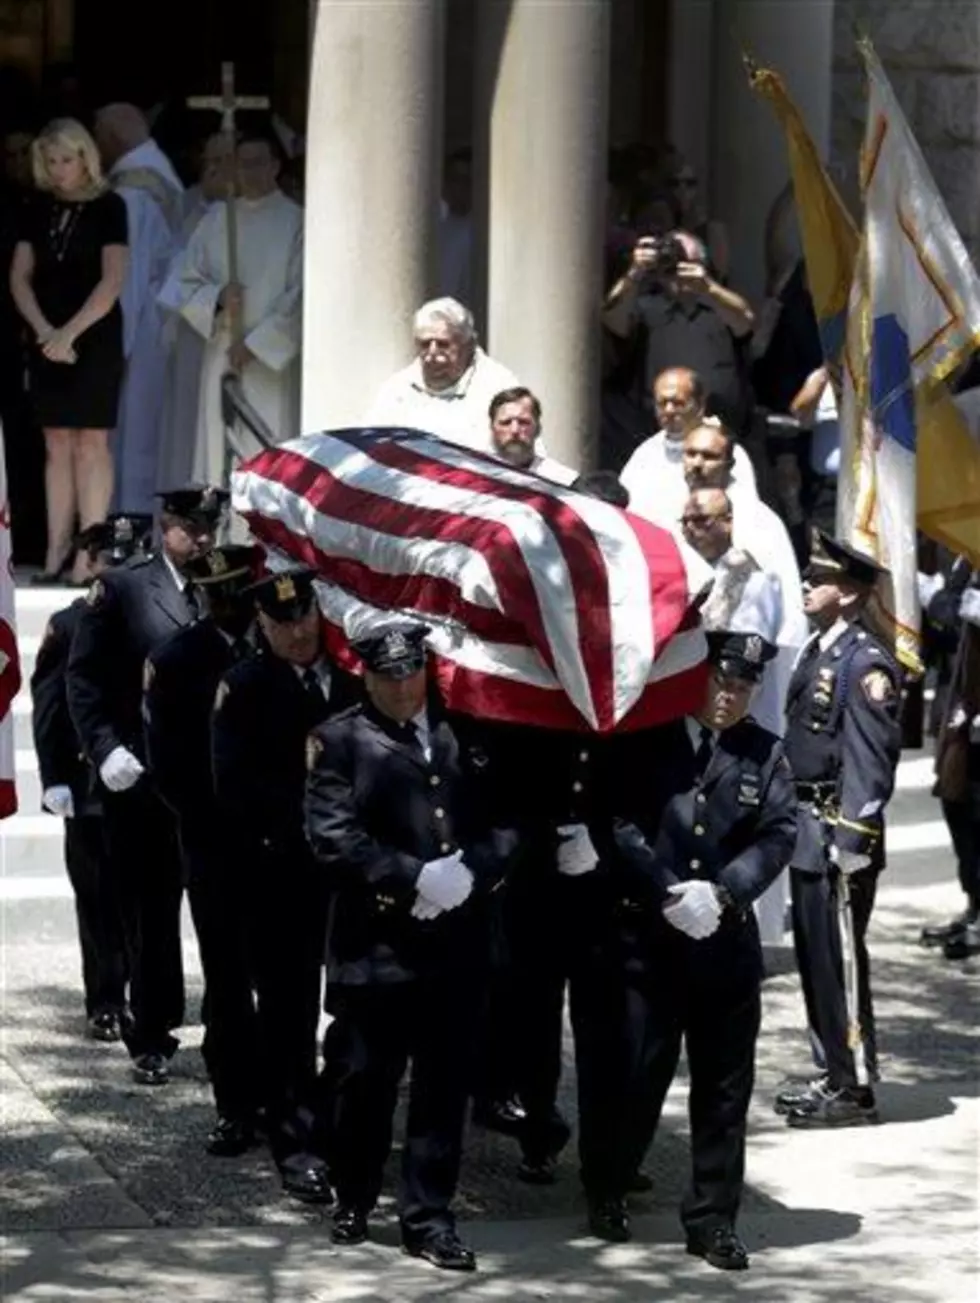 Job-related police deaths on the rise in 2014